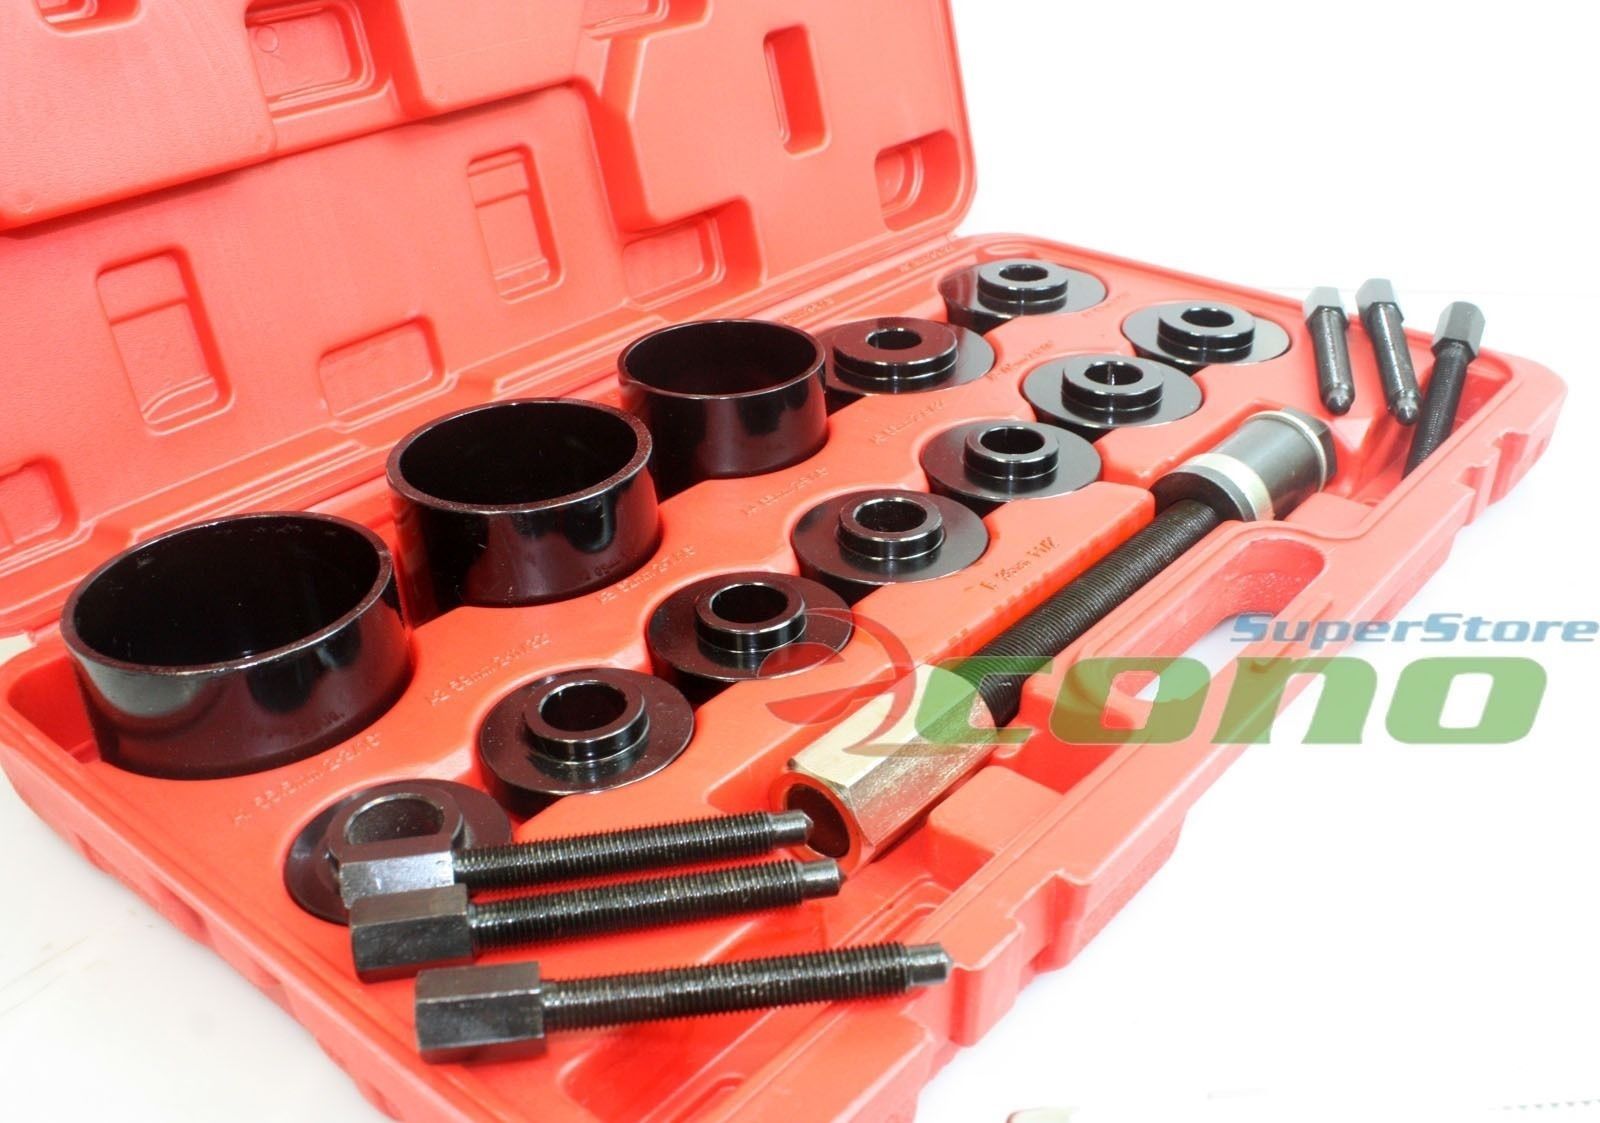 TRIL GEAR 19pcs Universal Master Set FWD Front Wheel Drive Bearing Puller Hub Removal Install Service Tool Kit 2-3/16 to 3-19/32 Drift Size